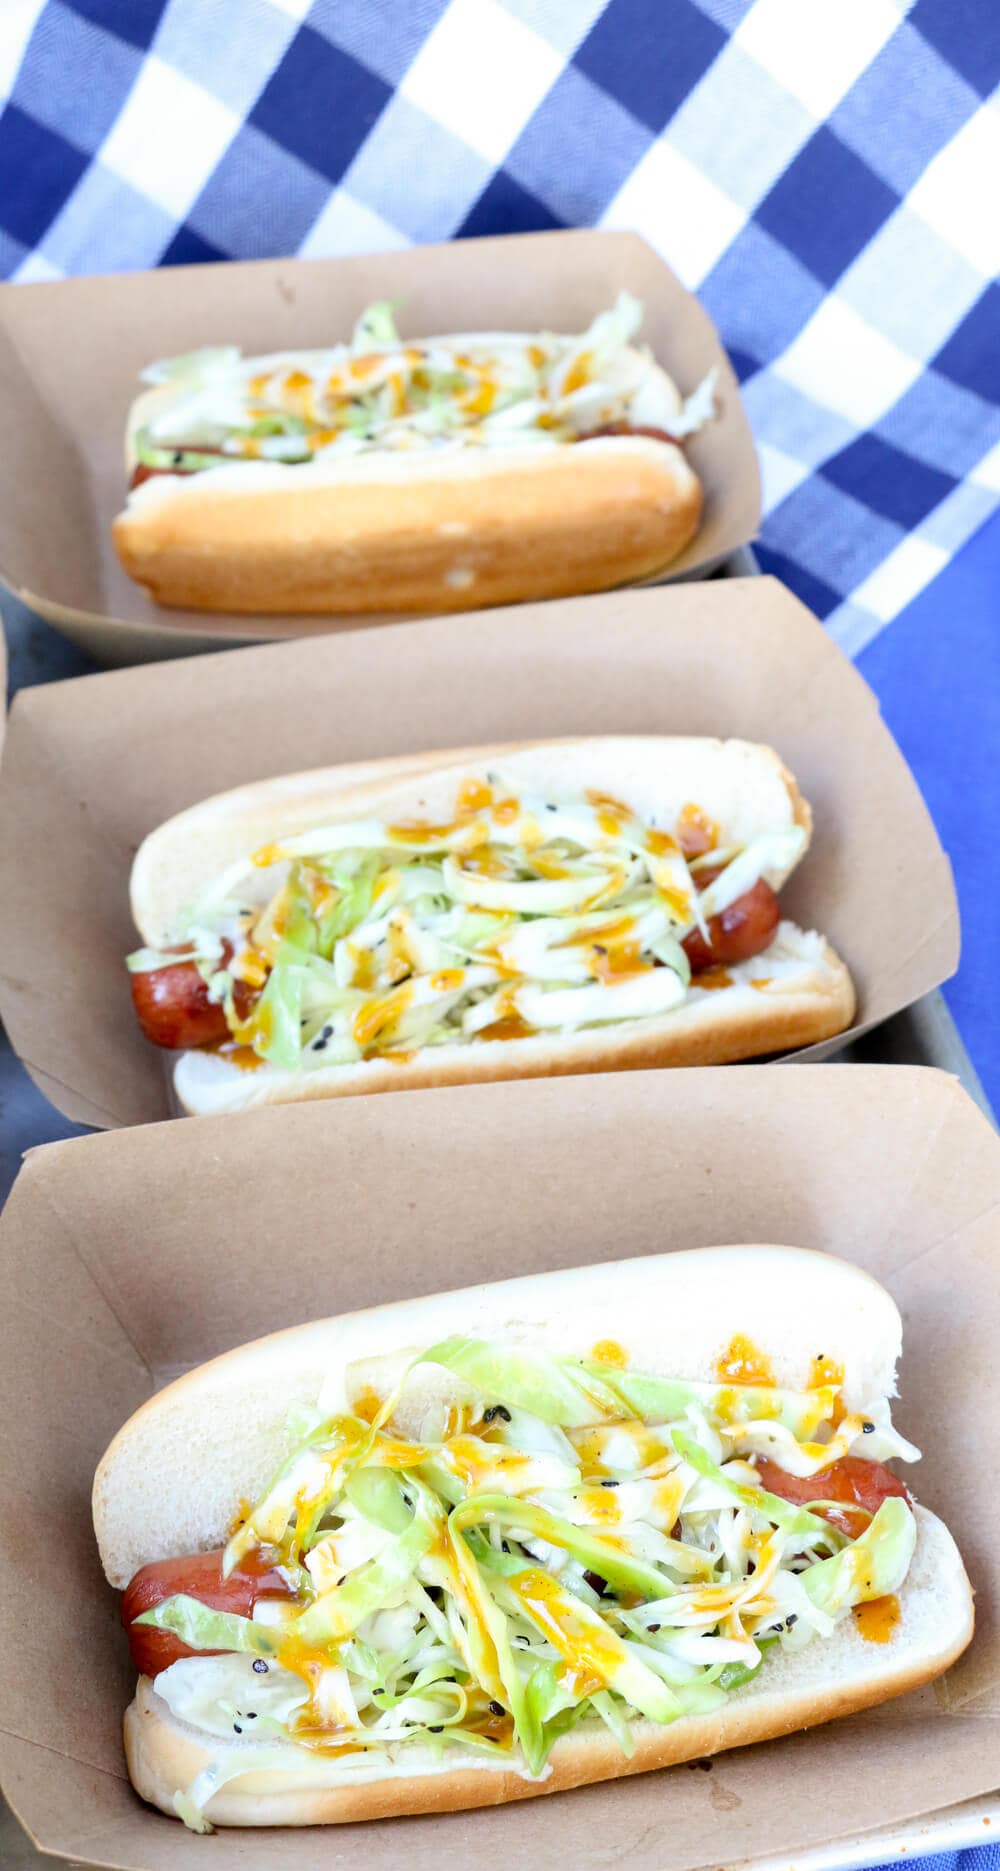 Football Tailgating Party ...Cheer on your favorite football team with friends, food, and this recipe for a BBQ hot dog.